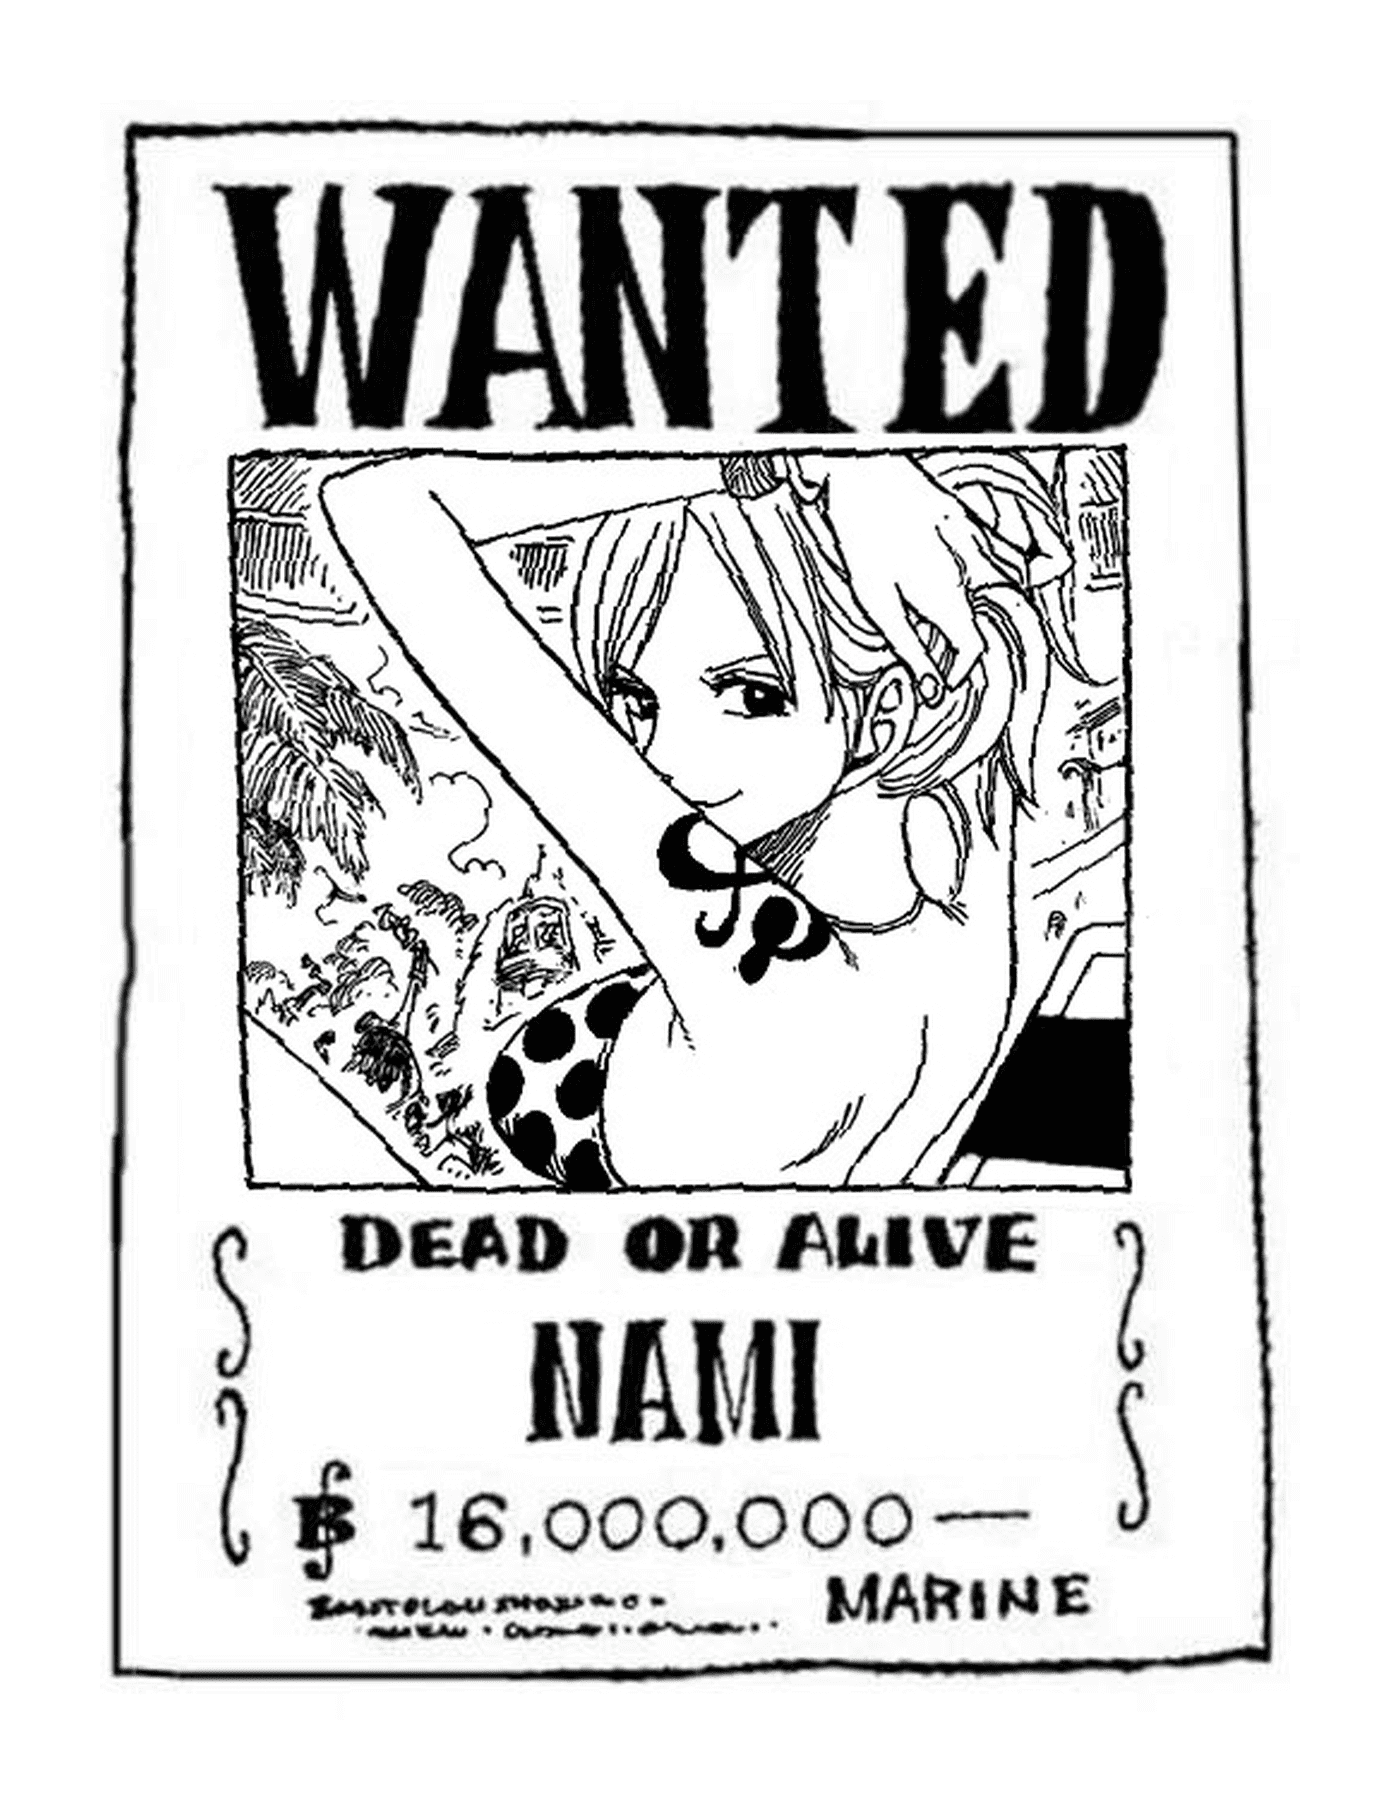  Wanted Nami, dead or alive 